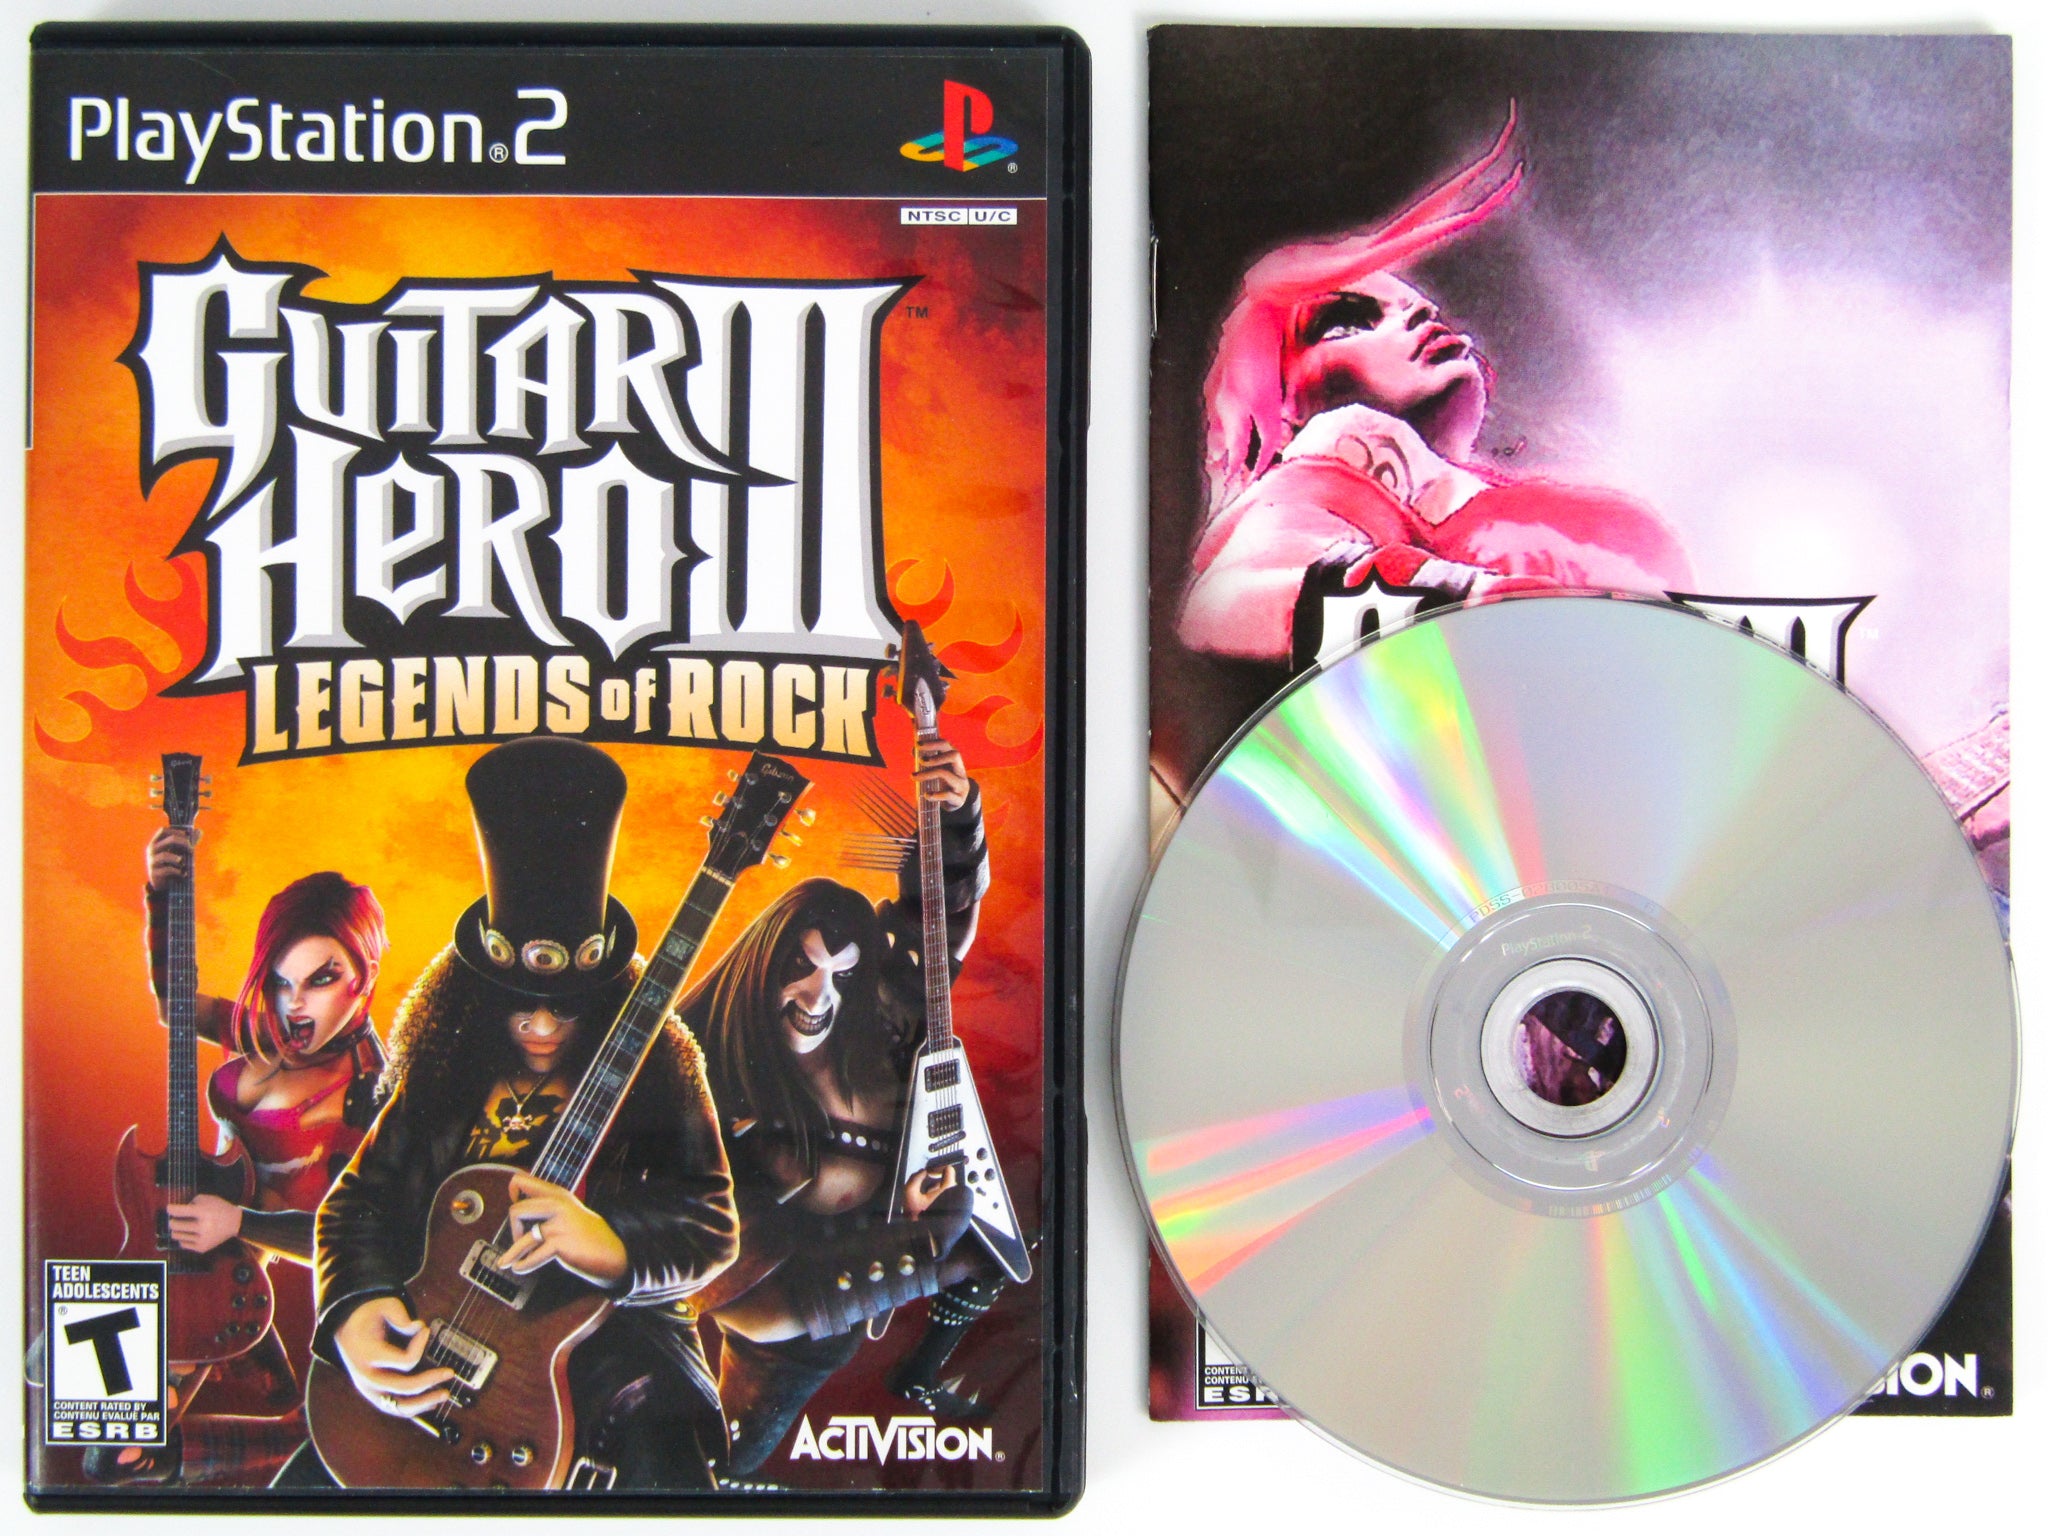 Guitar Hero III (Game Only) - PlayStation 3, PlayStation 3